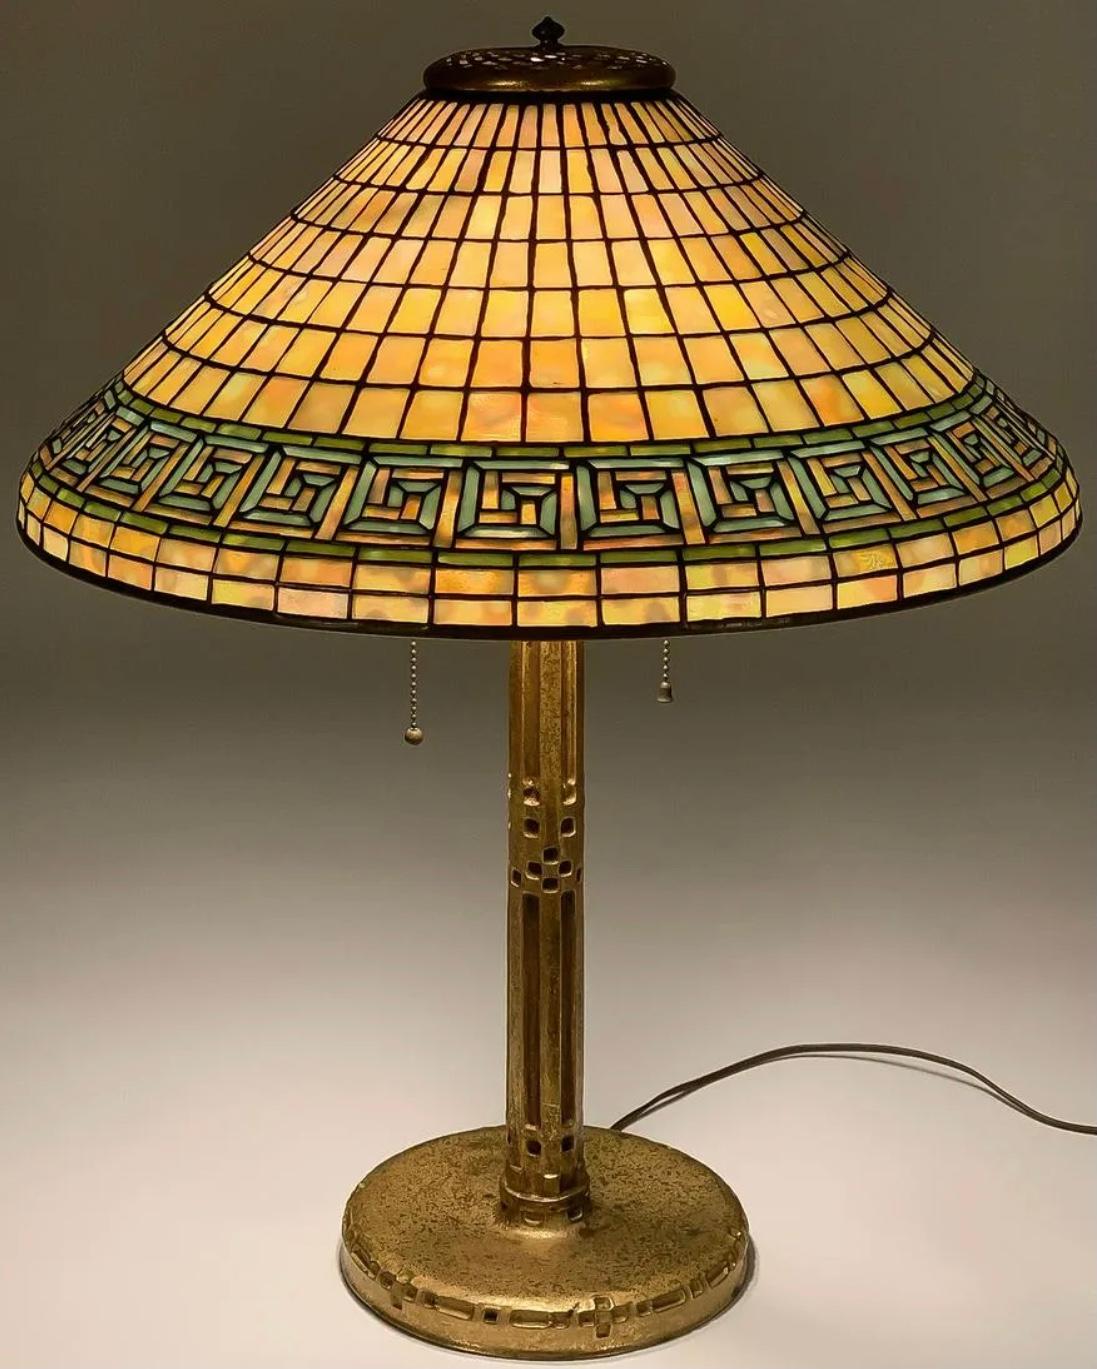 Tiffany Studios Greek key table lamp 
Circa. 1910. New York.

A large and beautiful 20-inch diameter conical leaded glass shade banded with Greek Key pattern over a geometric field and with typical thin gilt leading. Colors are mottled yellow,